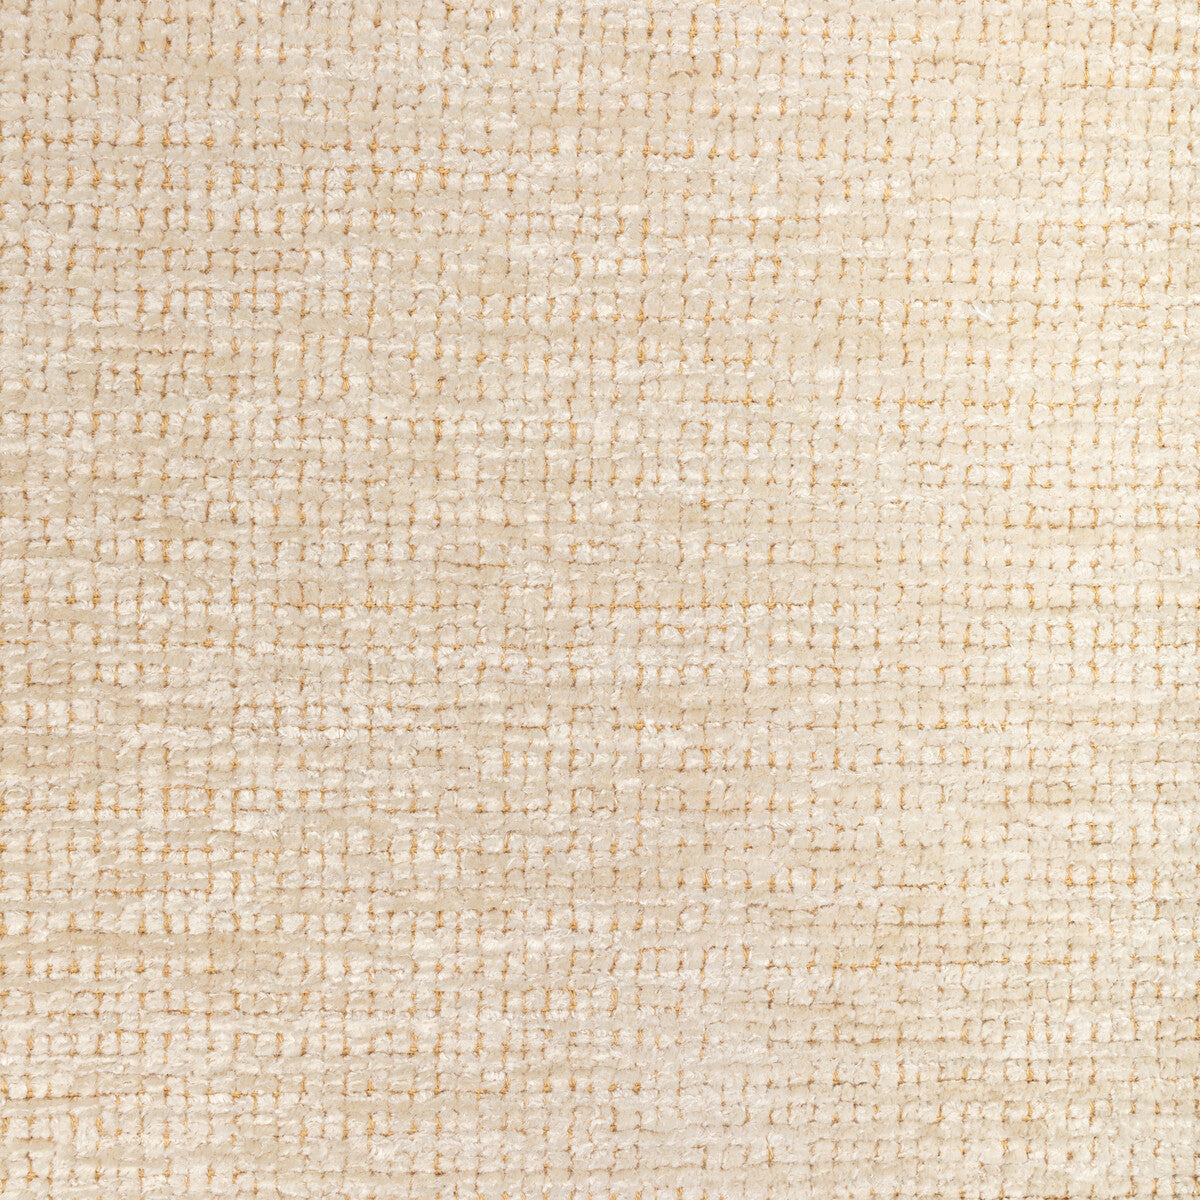 Lemenc Texture fabric in cream color - pattern 8022124.1116.0 - by Brunschwig &amp; Fils in the Chambery Textures III collection